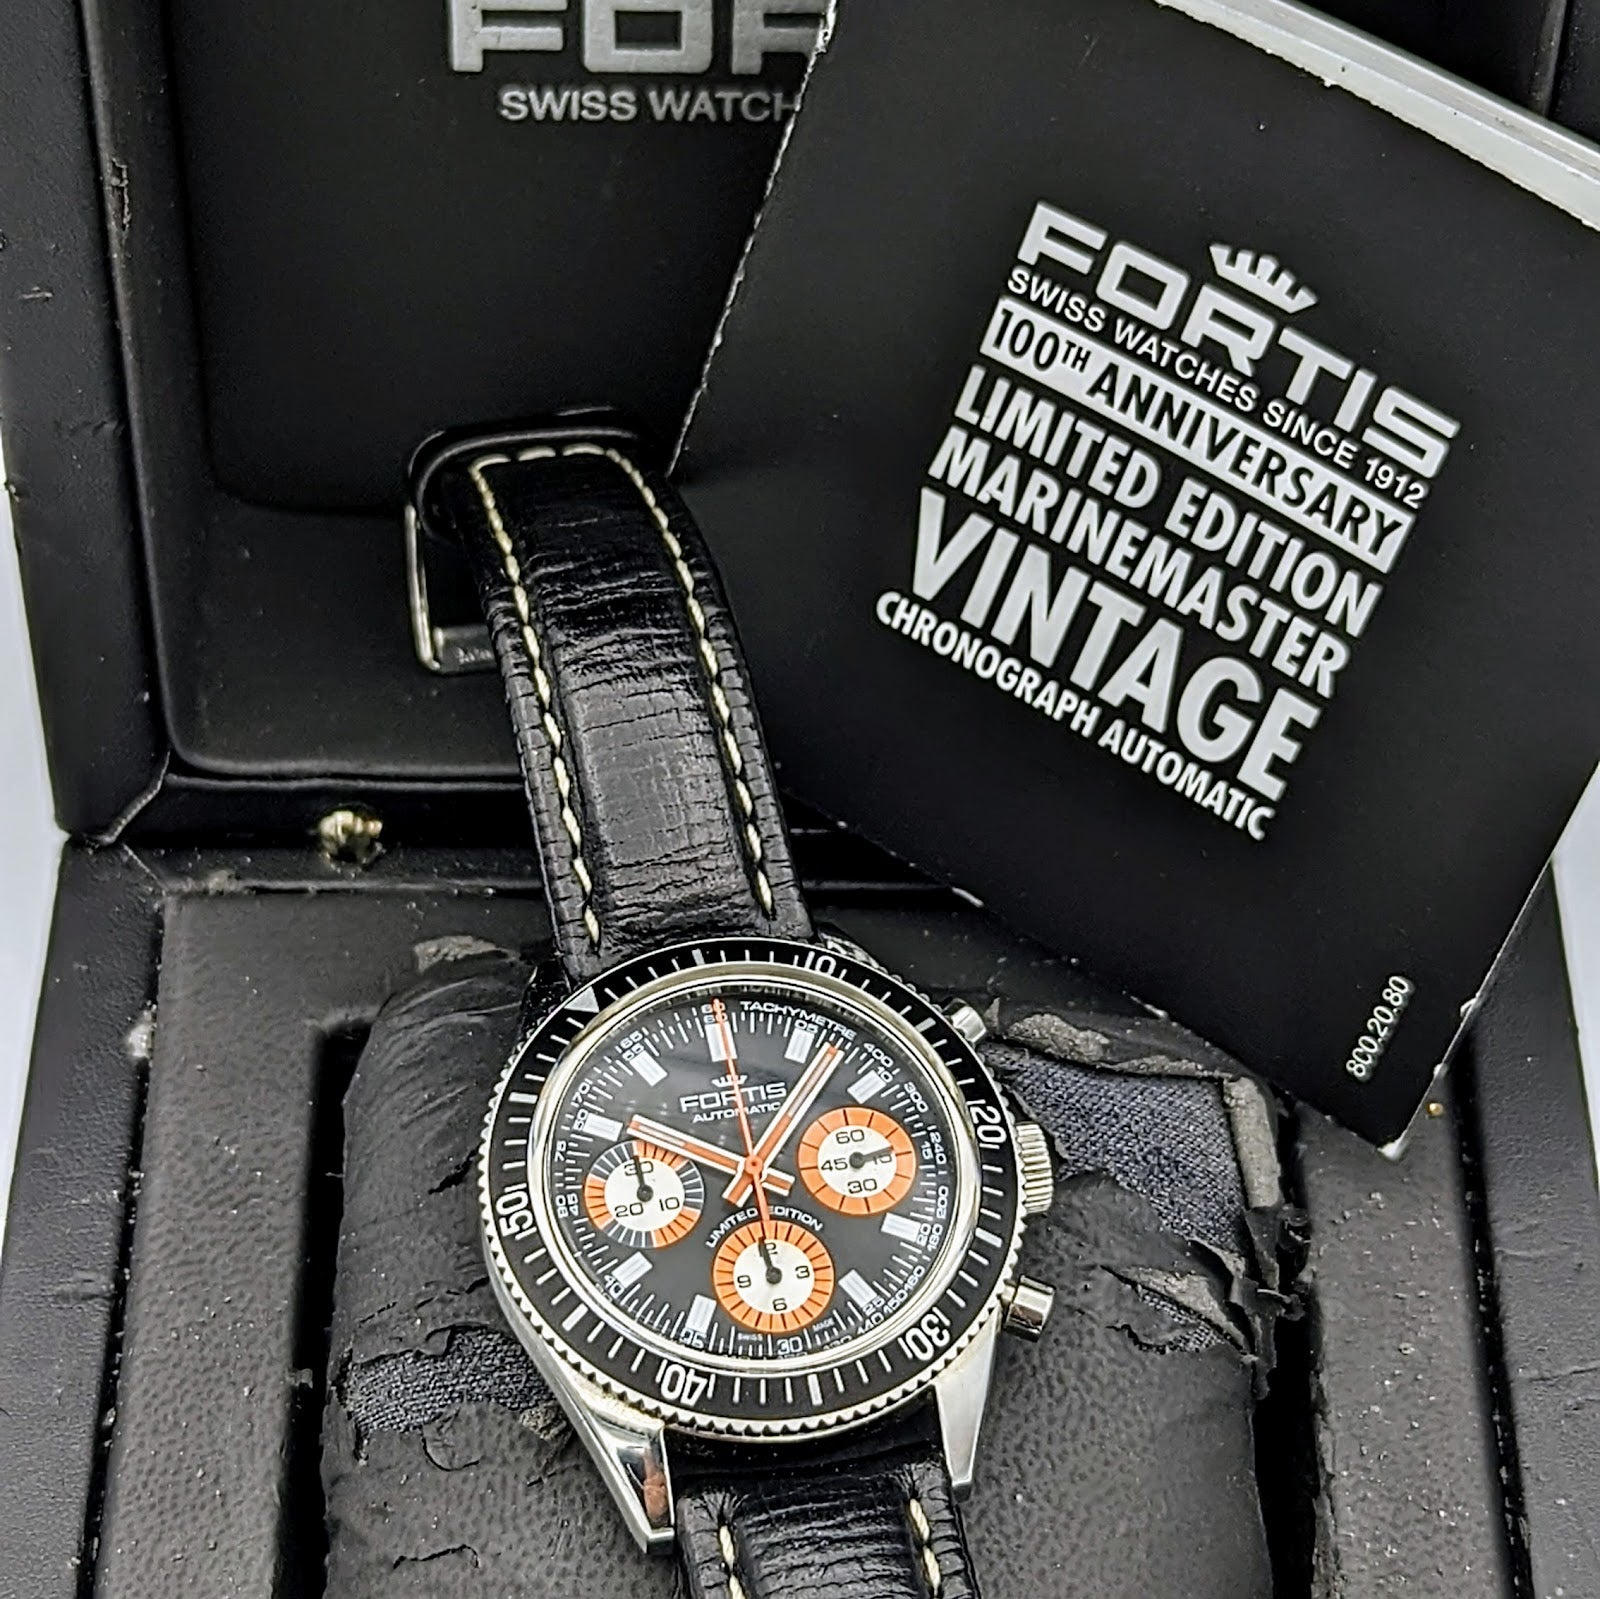 FORTIS 100th Anniversary Limited Edition Marinemaster Vintage Chronograph Automatic Watch